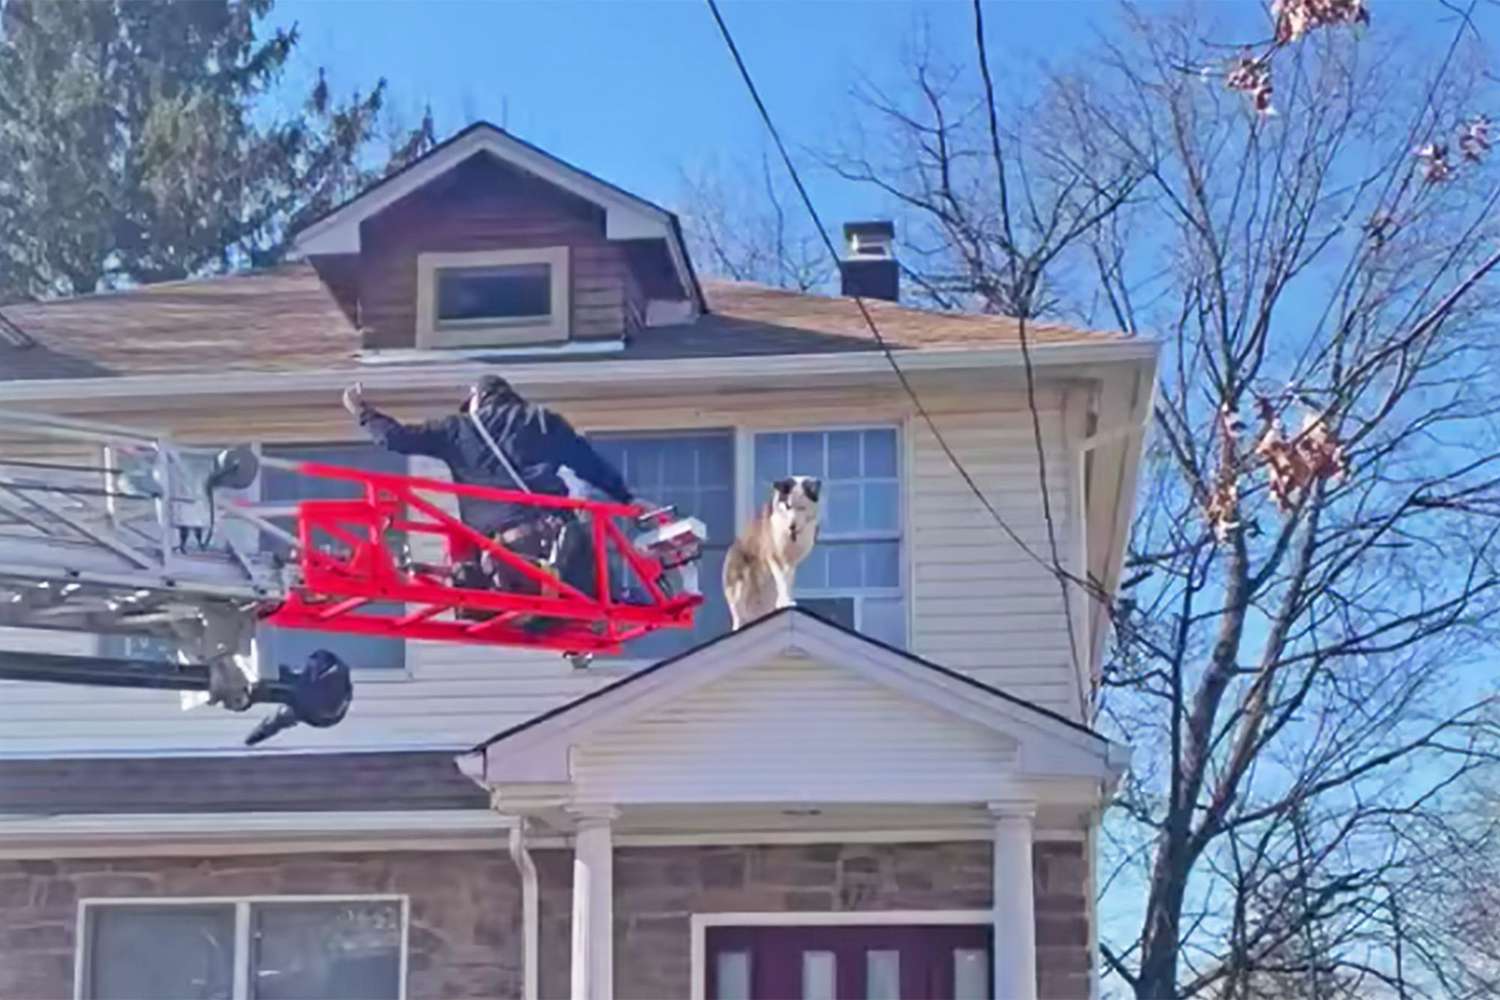 fireman rescuing dog from a residential roof